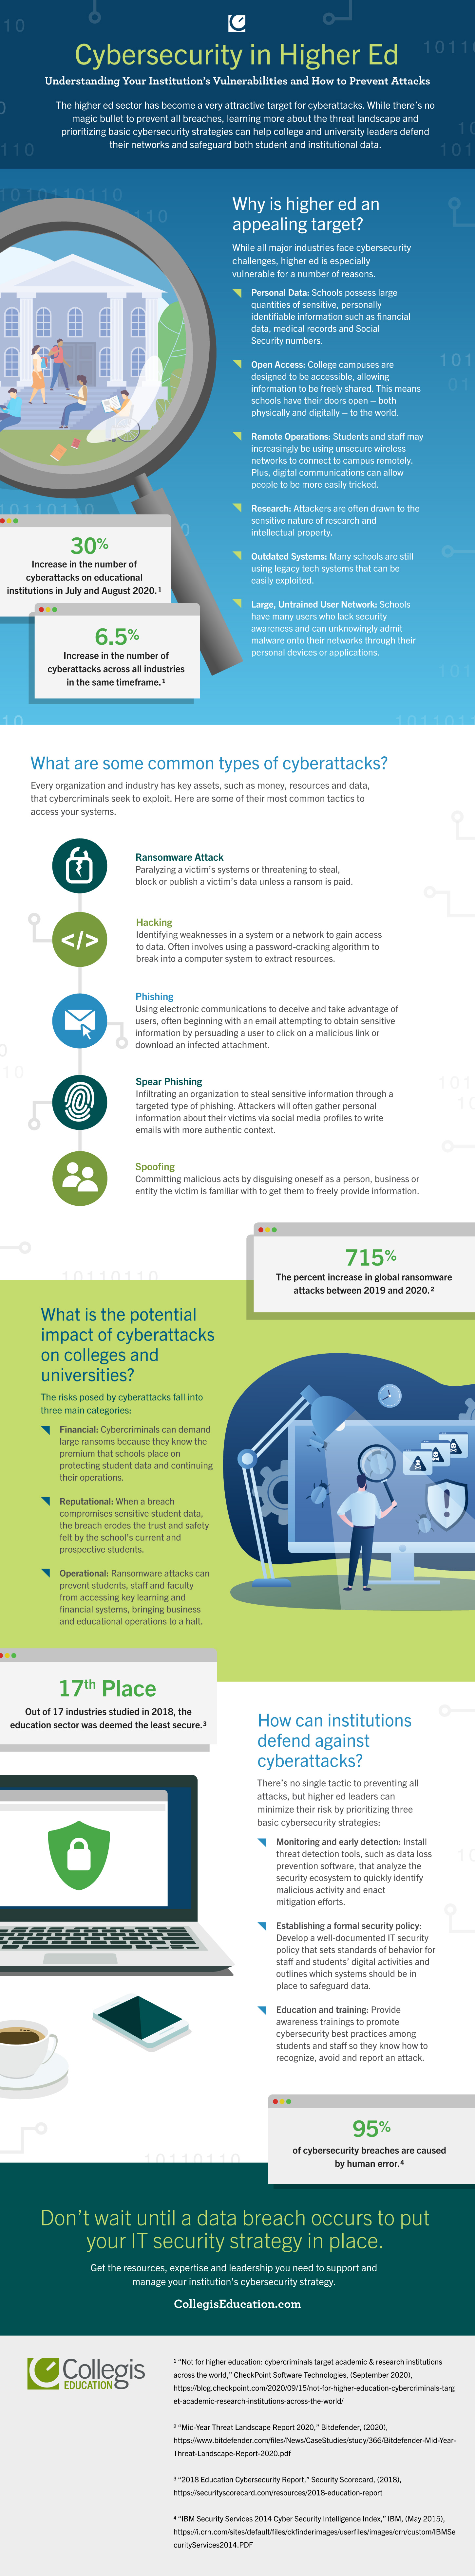 Why higher ed is vulnerable to cyberattacks infographic